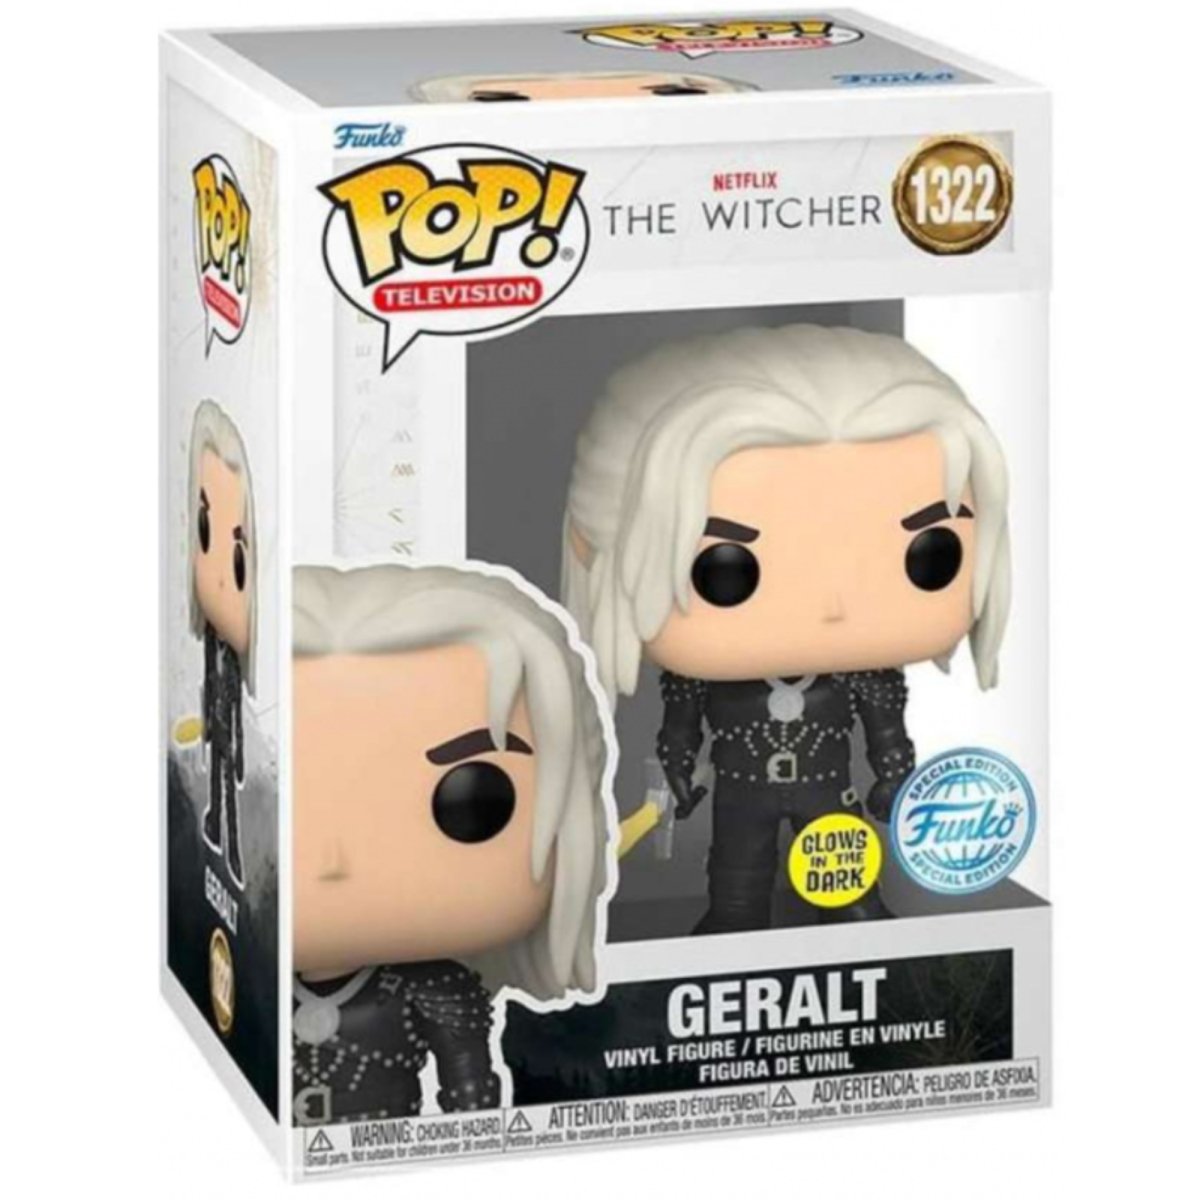 The Witcher - Geralt [with Sword] (GITD Special Edition) #1322 - Funko Pop! Vinyl Television - Persona Toys